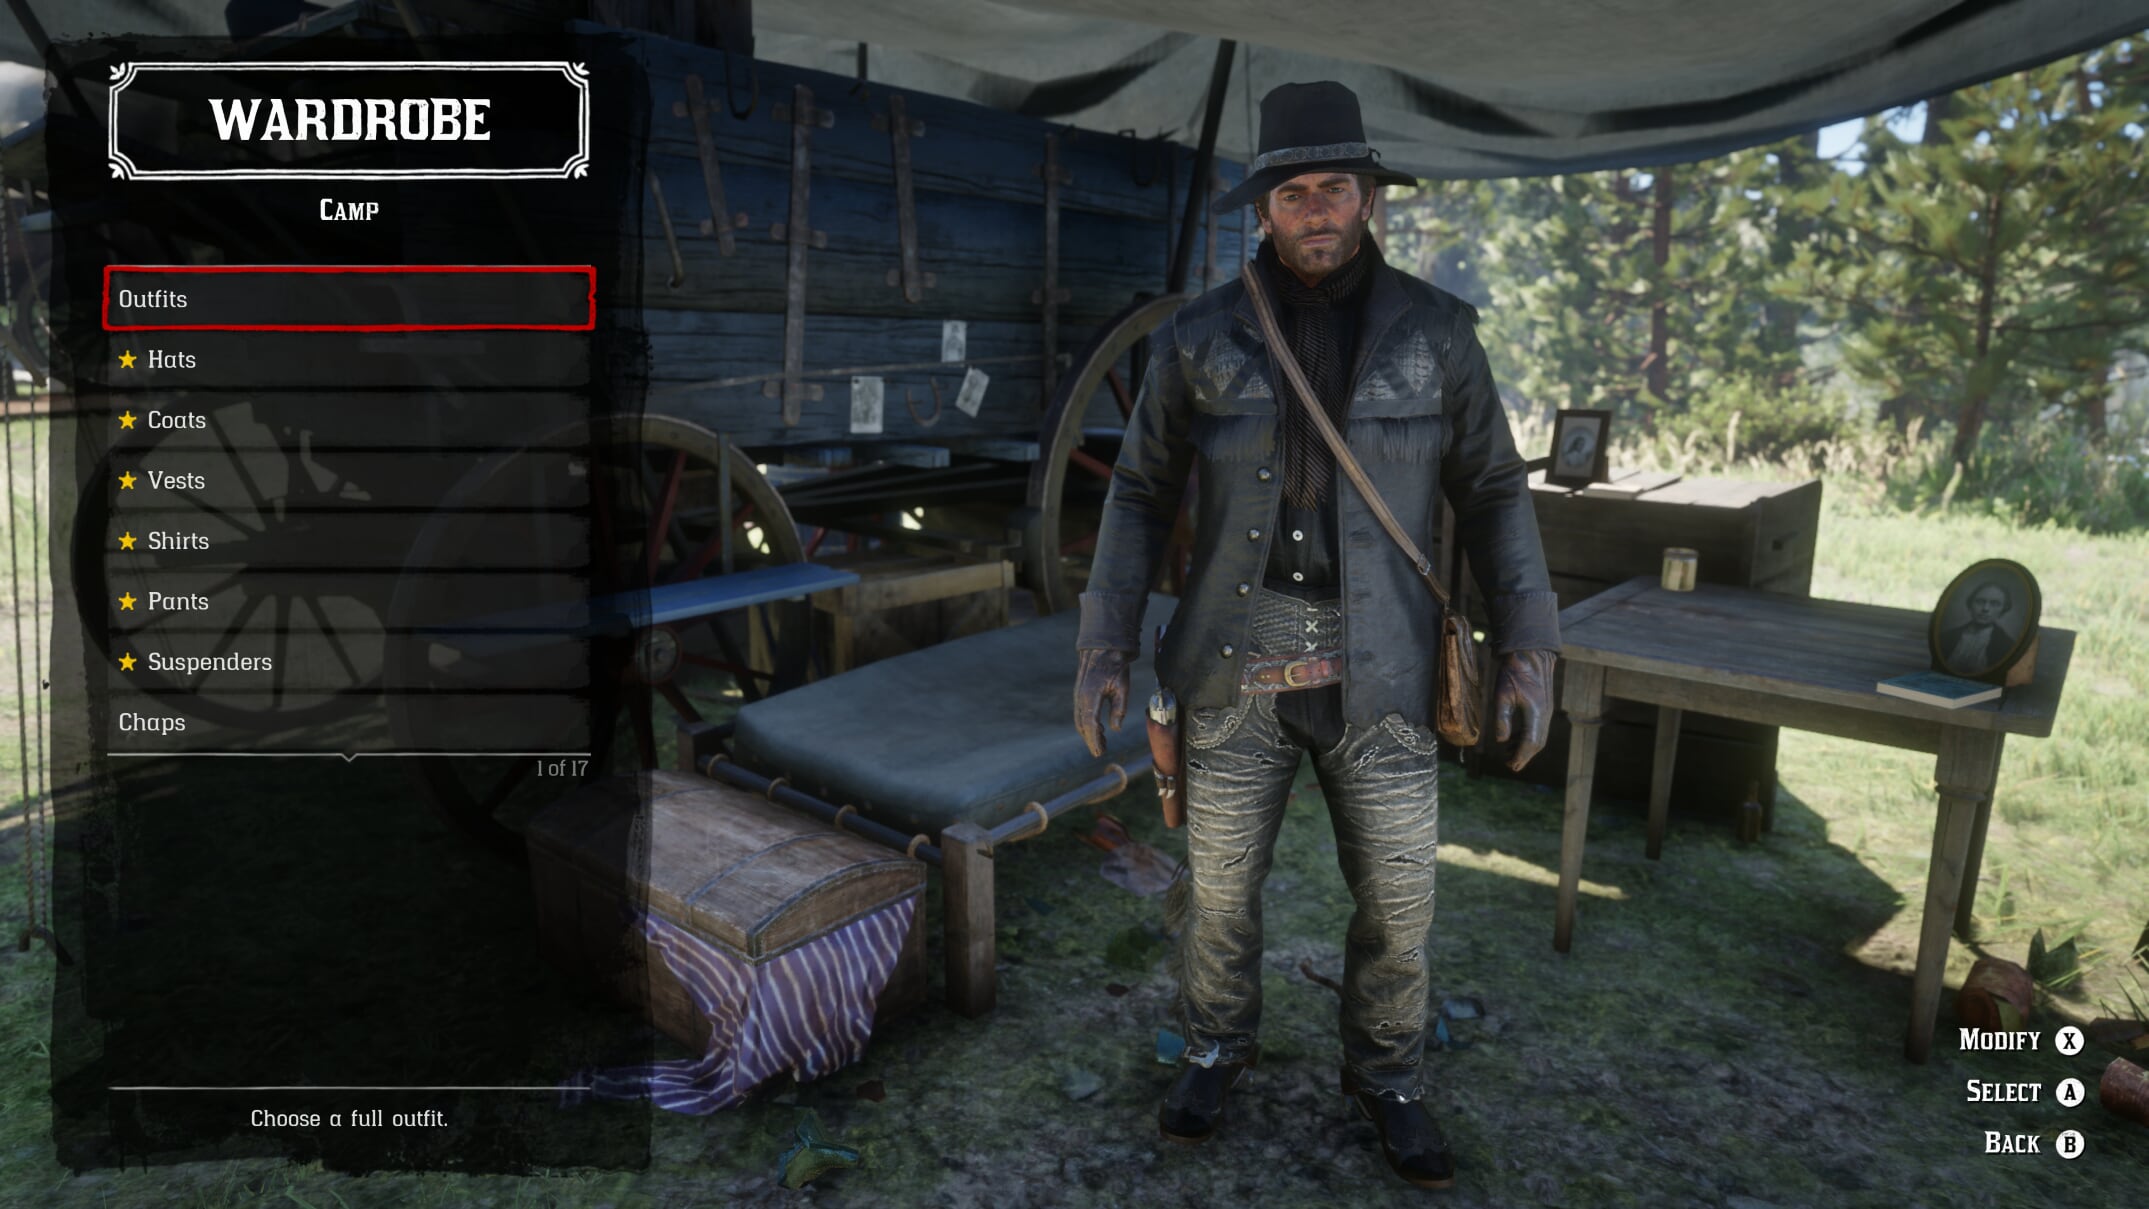 where to buy clothes red dead redemption